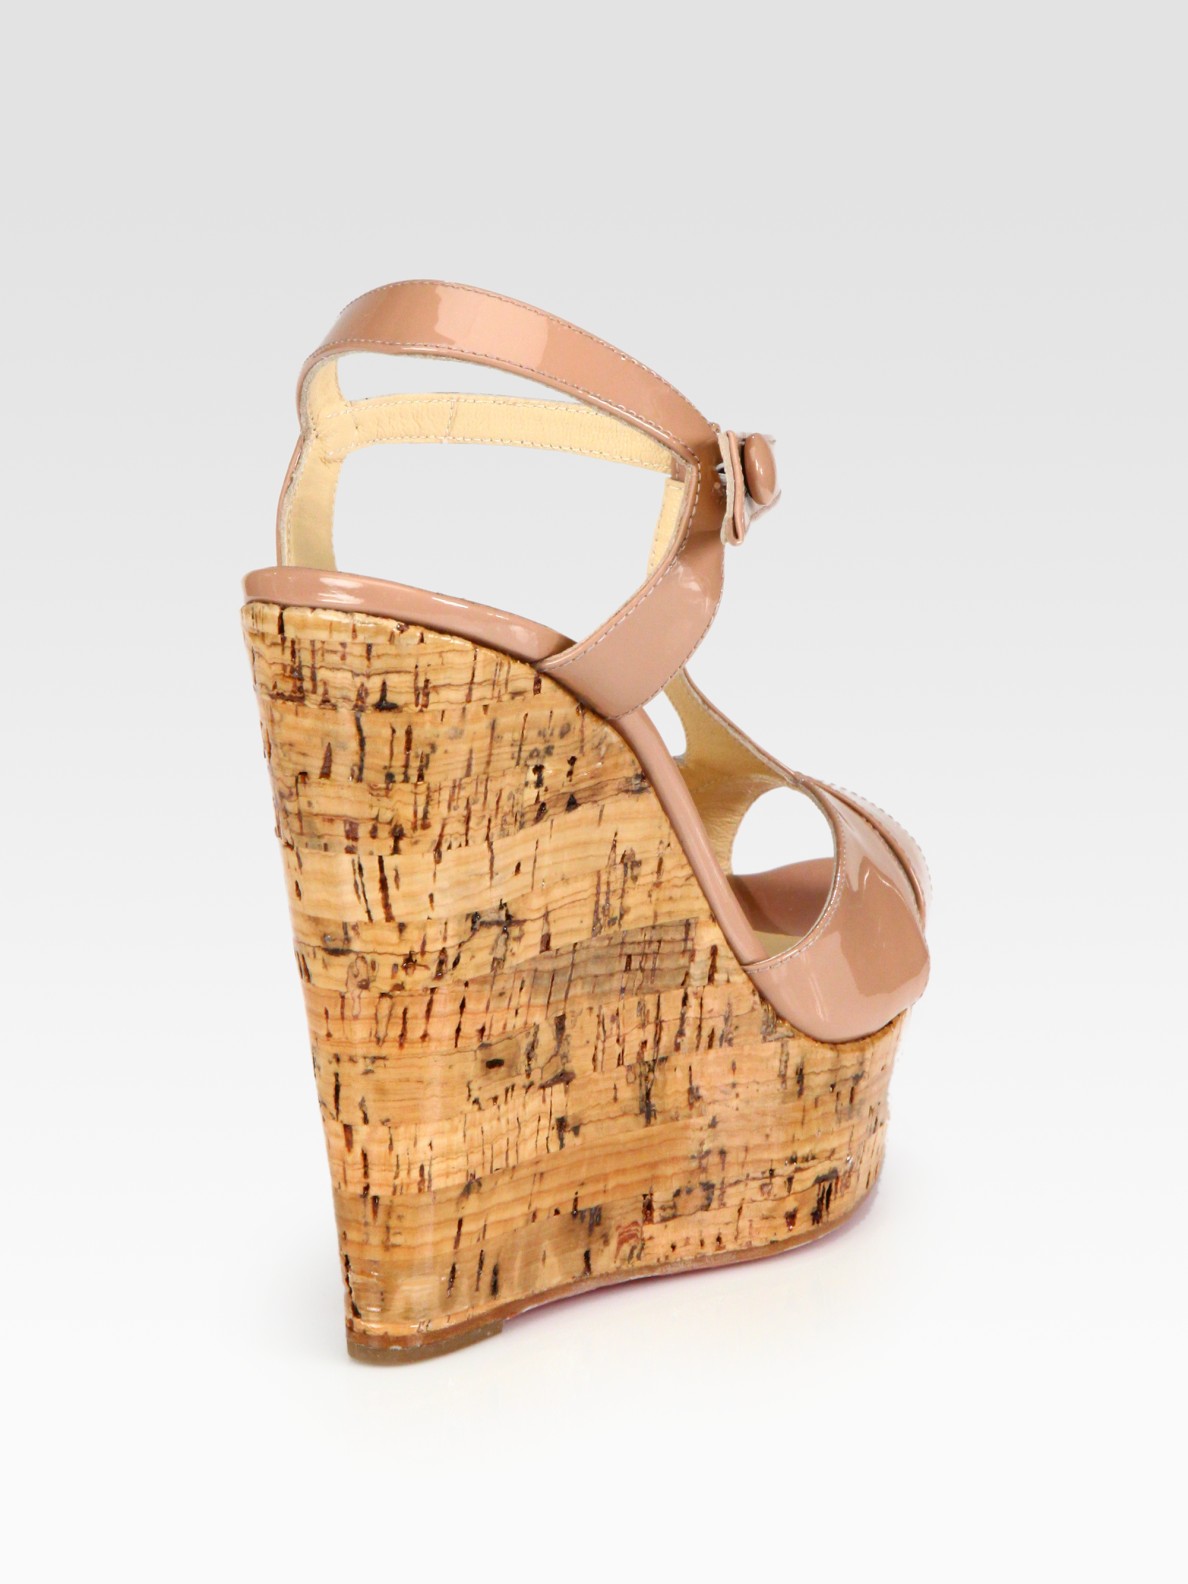 christian louboutin shop online fake - Christian louboutin Patent Leather T-strap Cork Wedge Sandals in ...